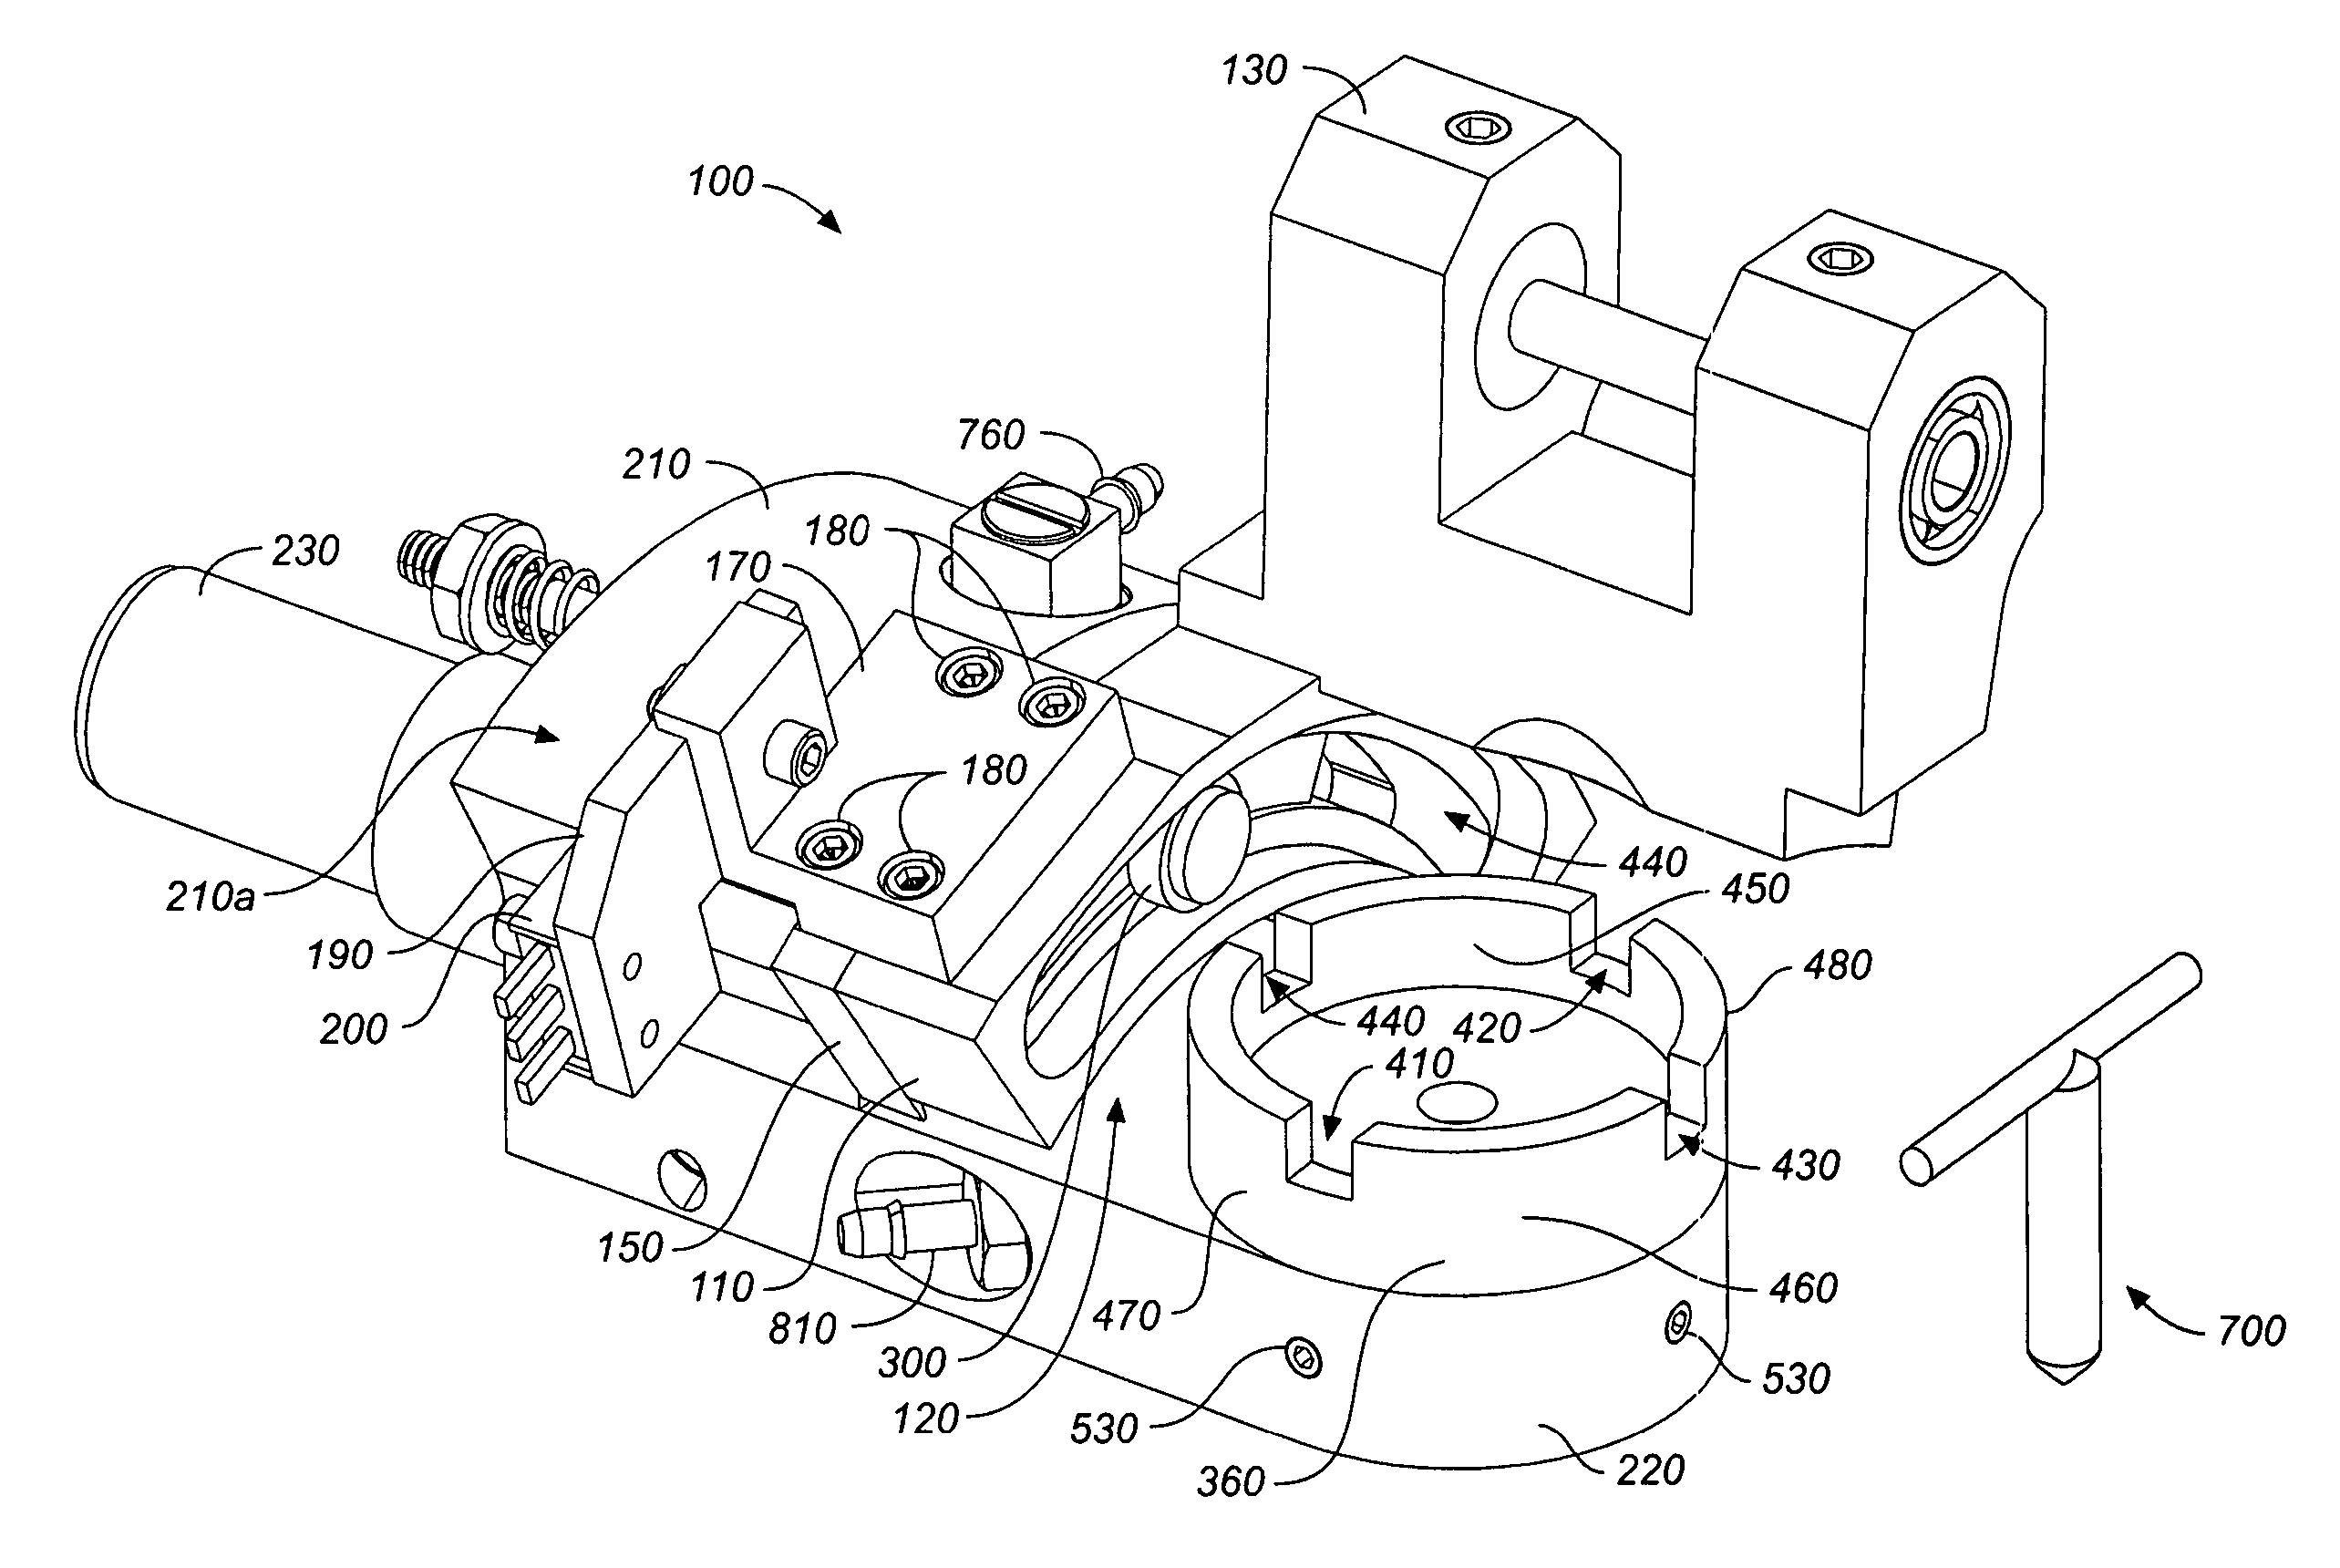 Automatic tool tilting apparatus for a scribe tool